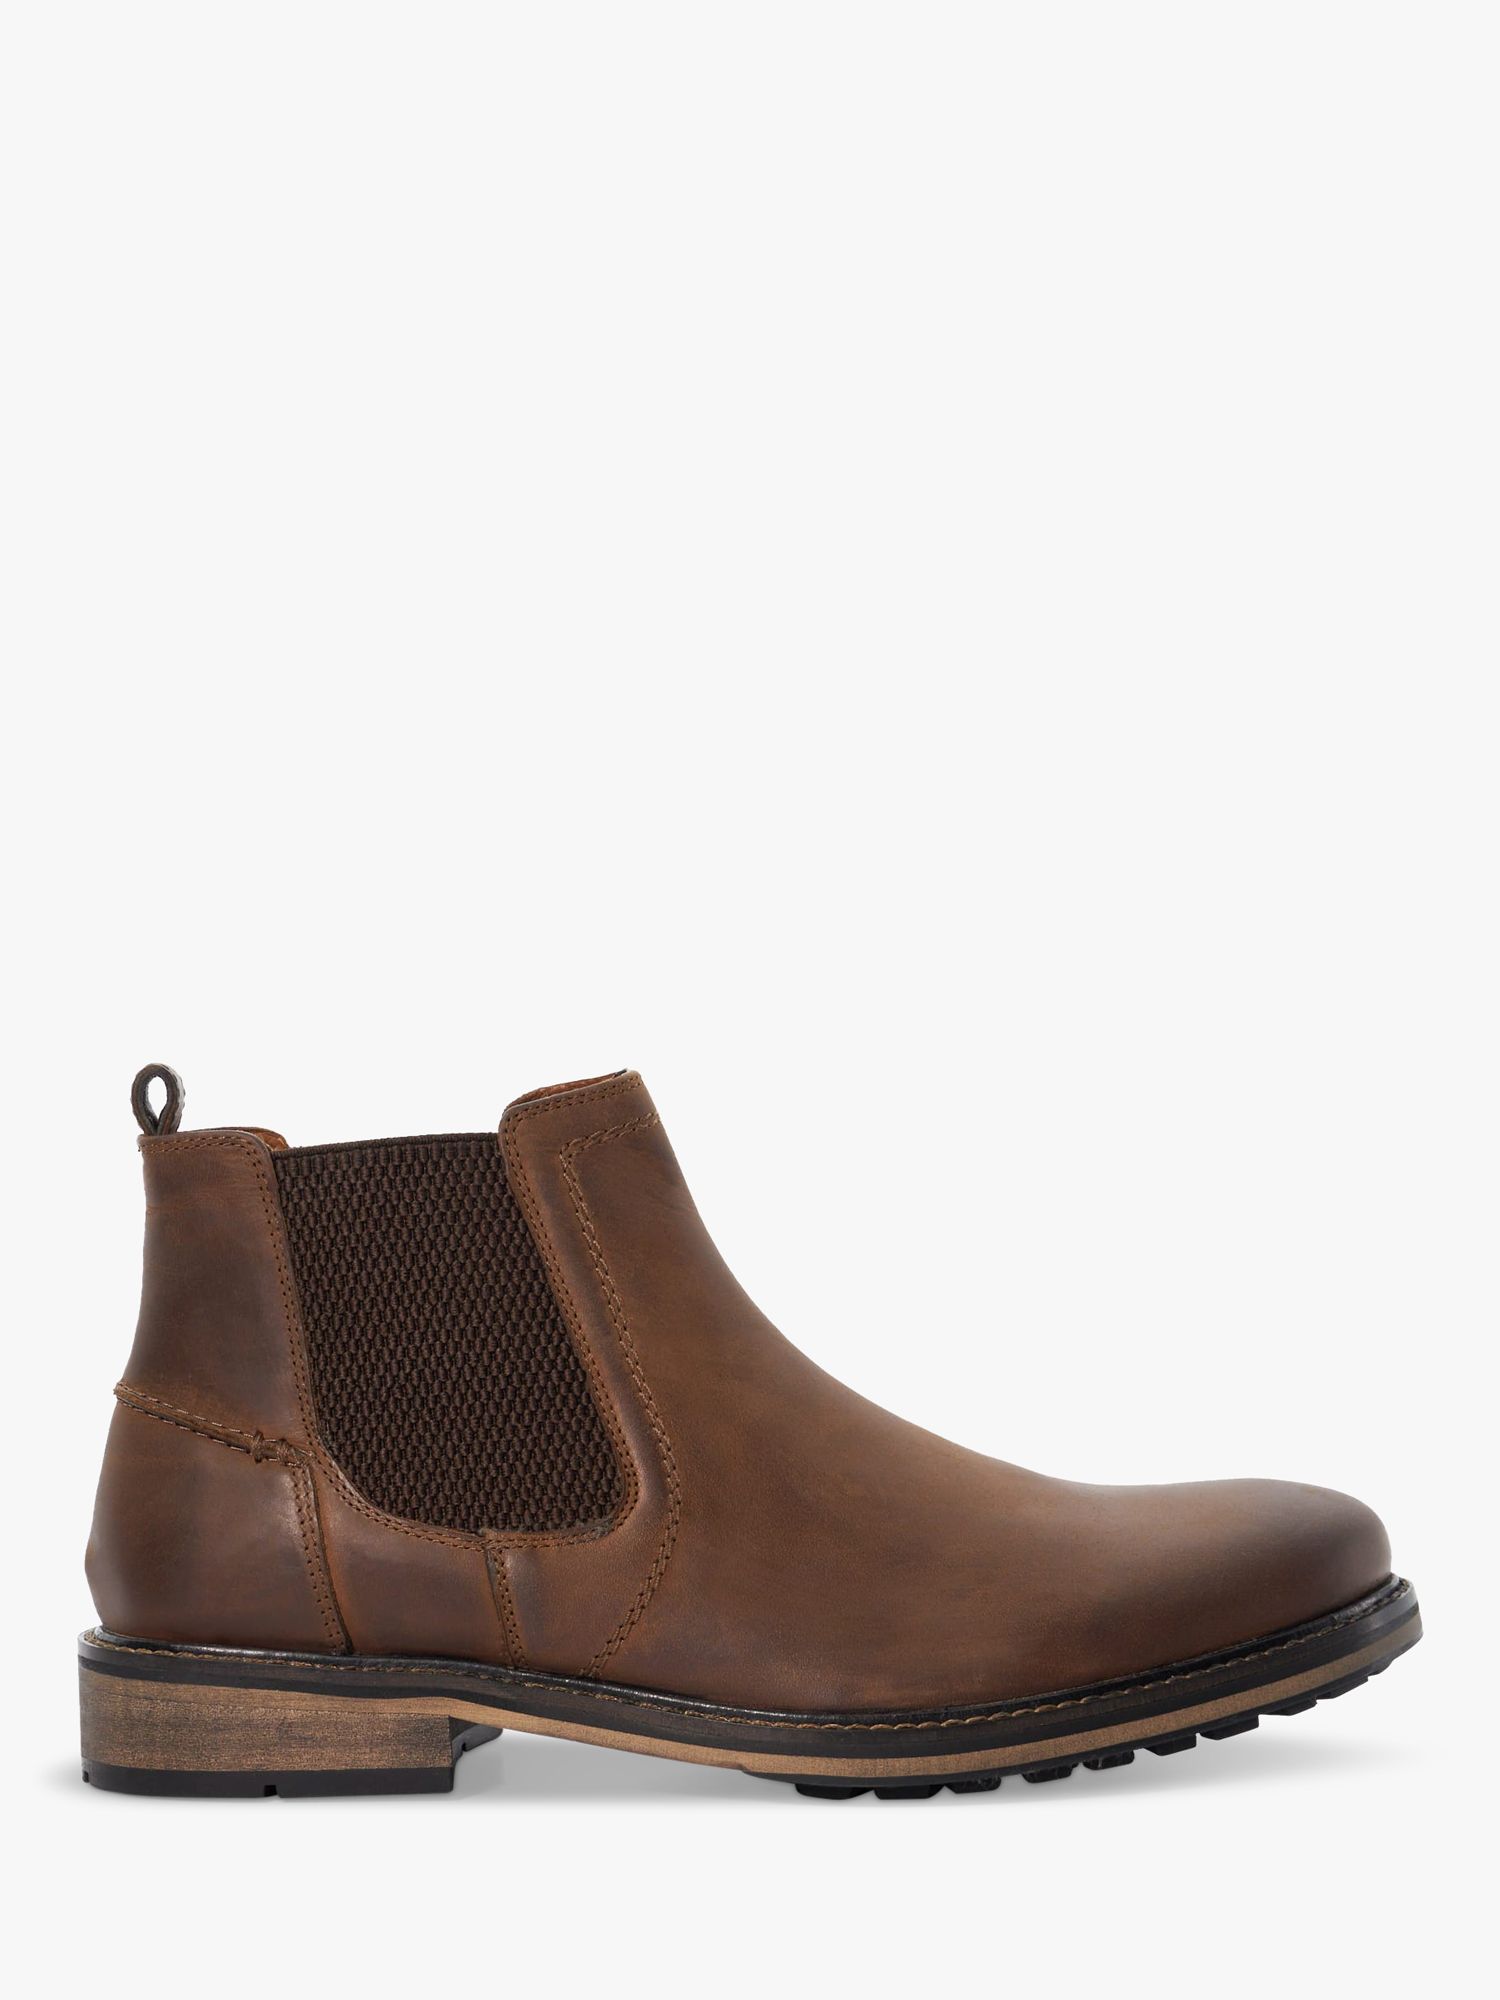 Dune Chorleys Leather Boots, Brown at John Lewis & Partners